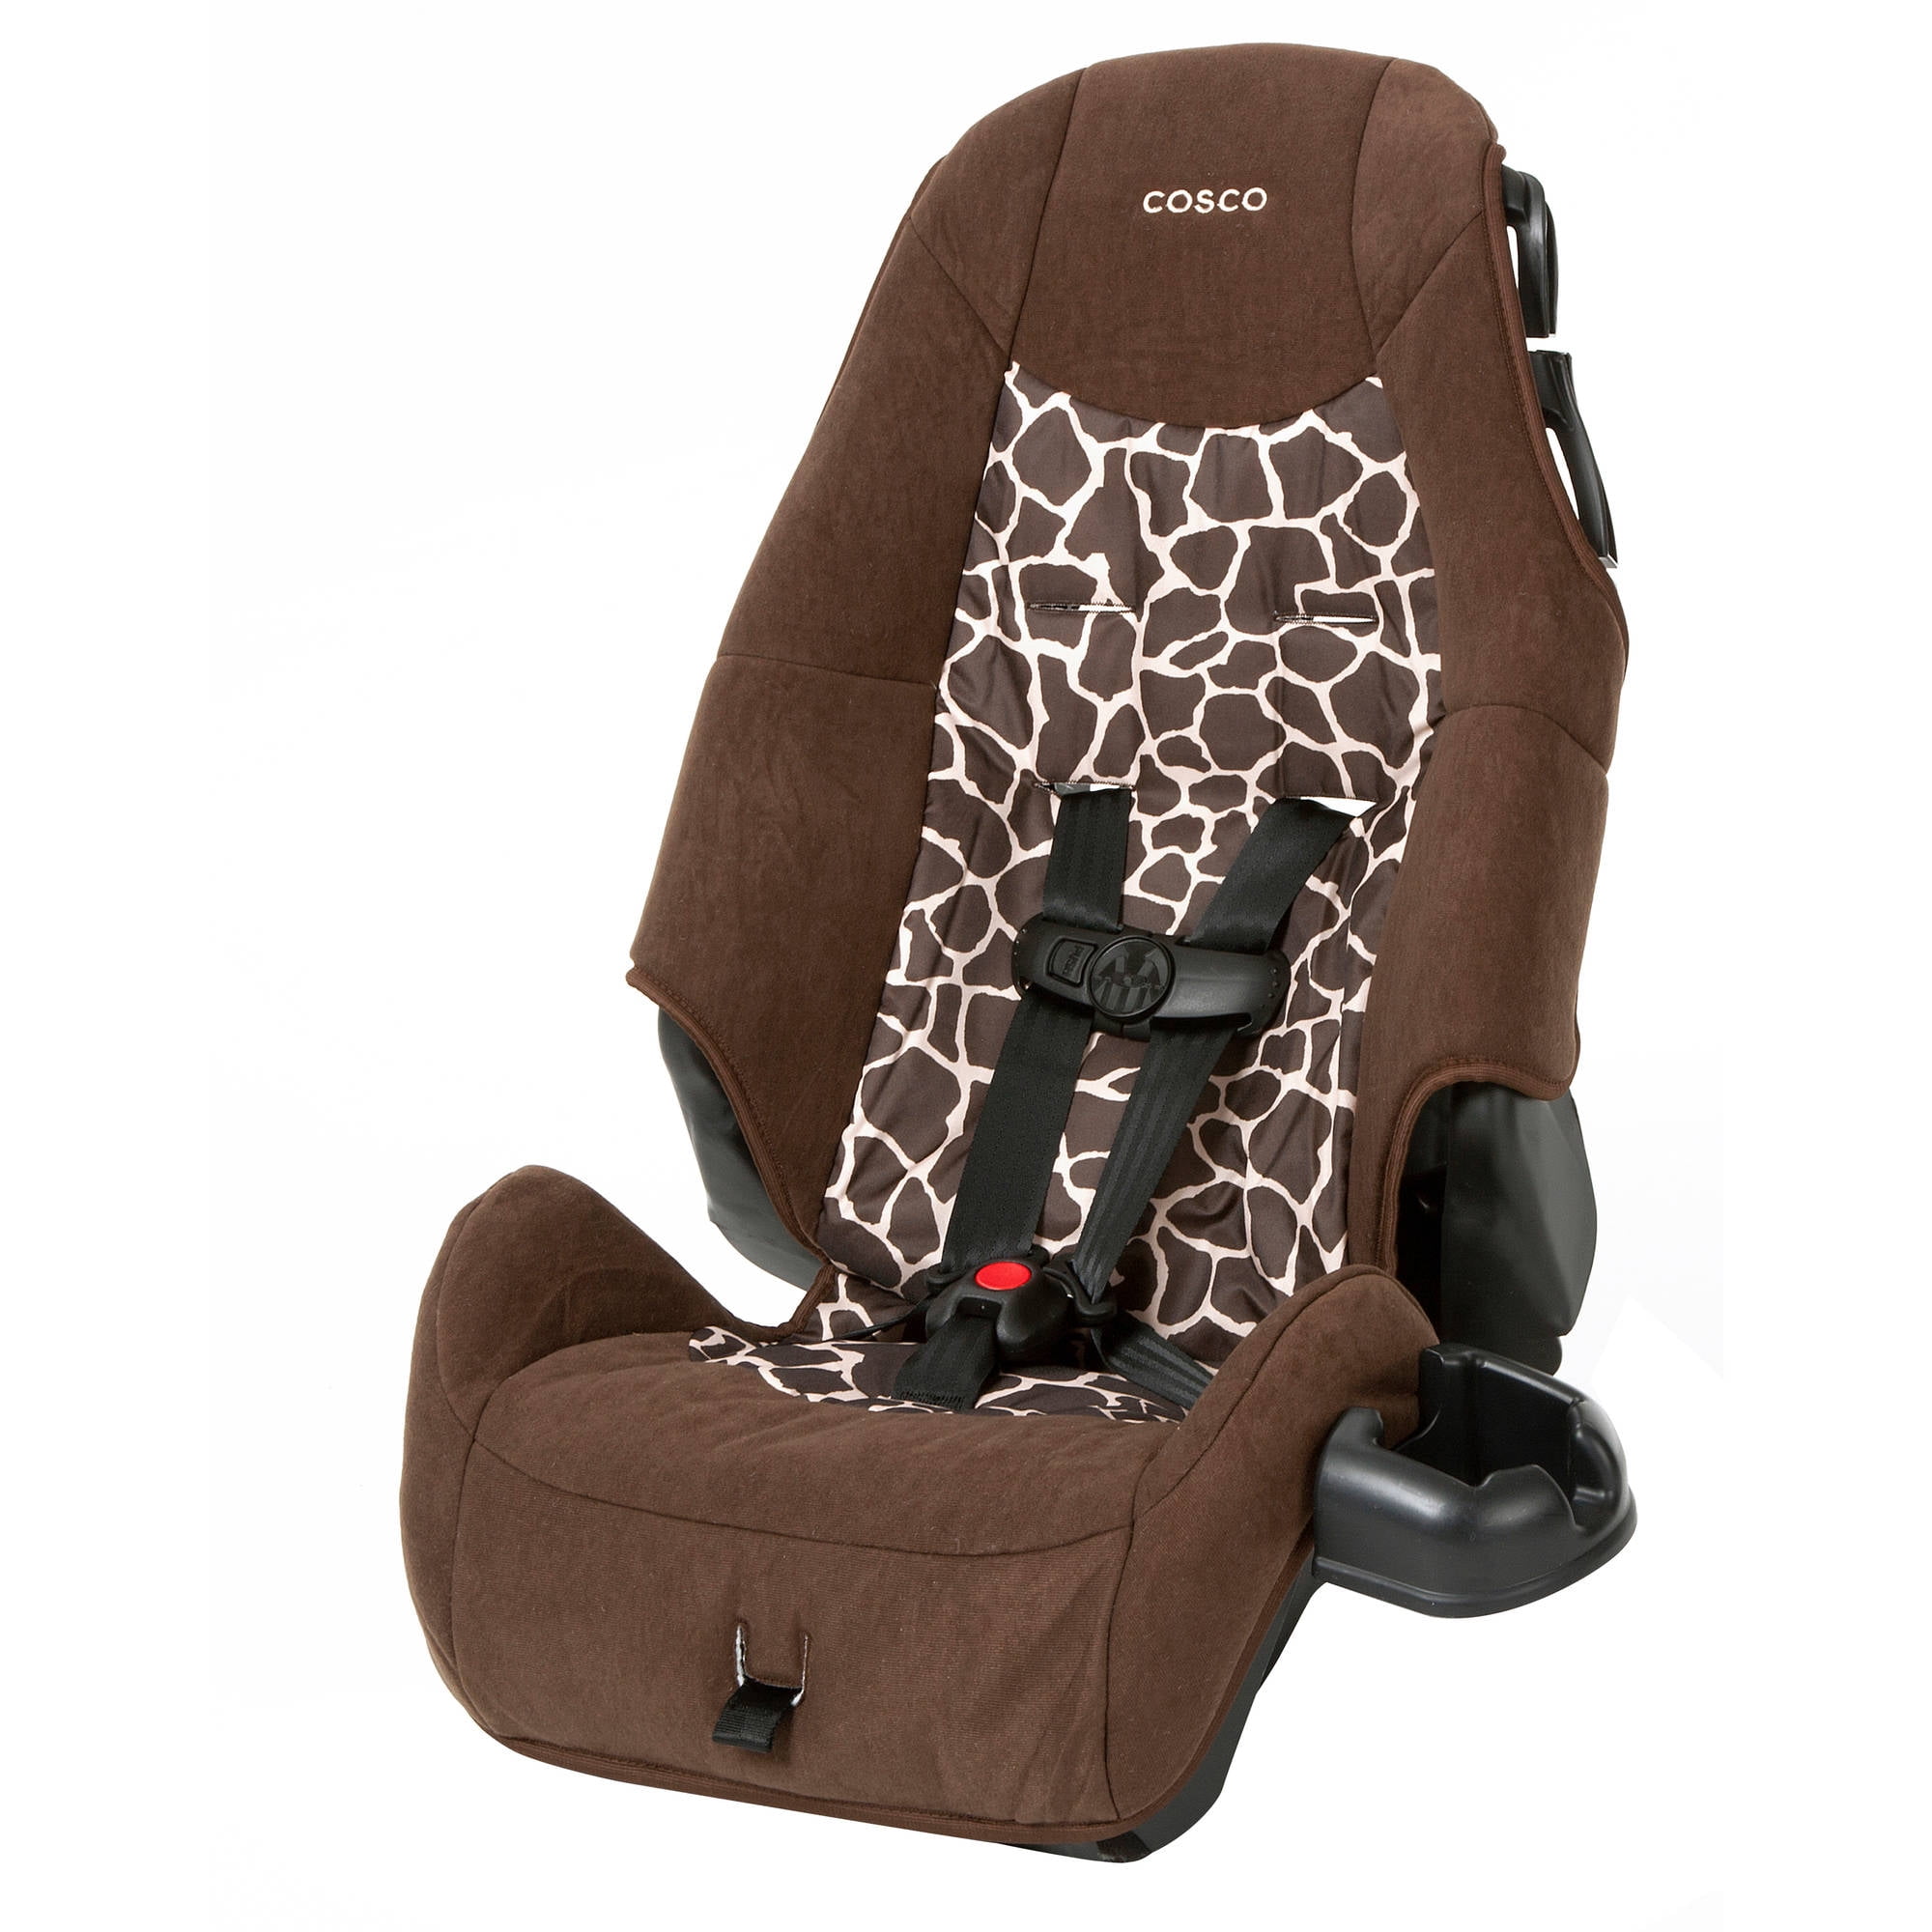 Cosco Highback Harness Booster Car Seat 